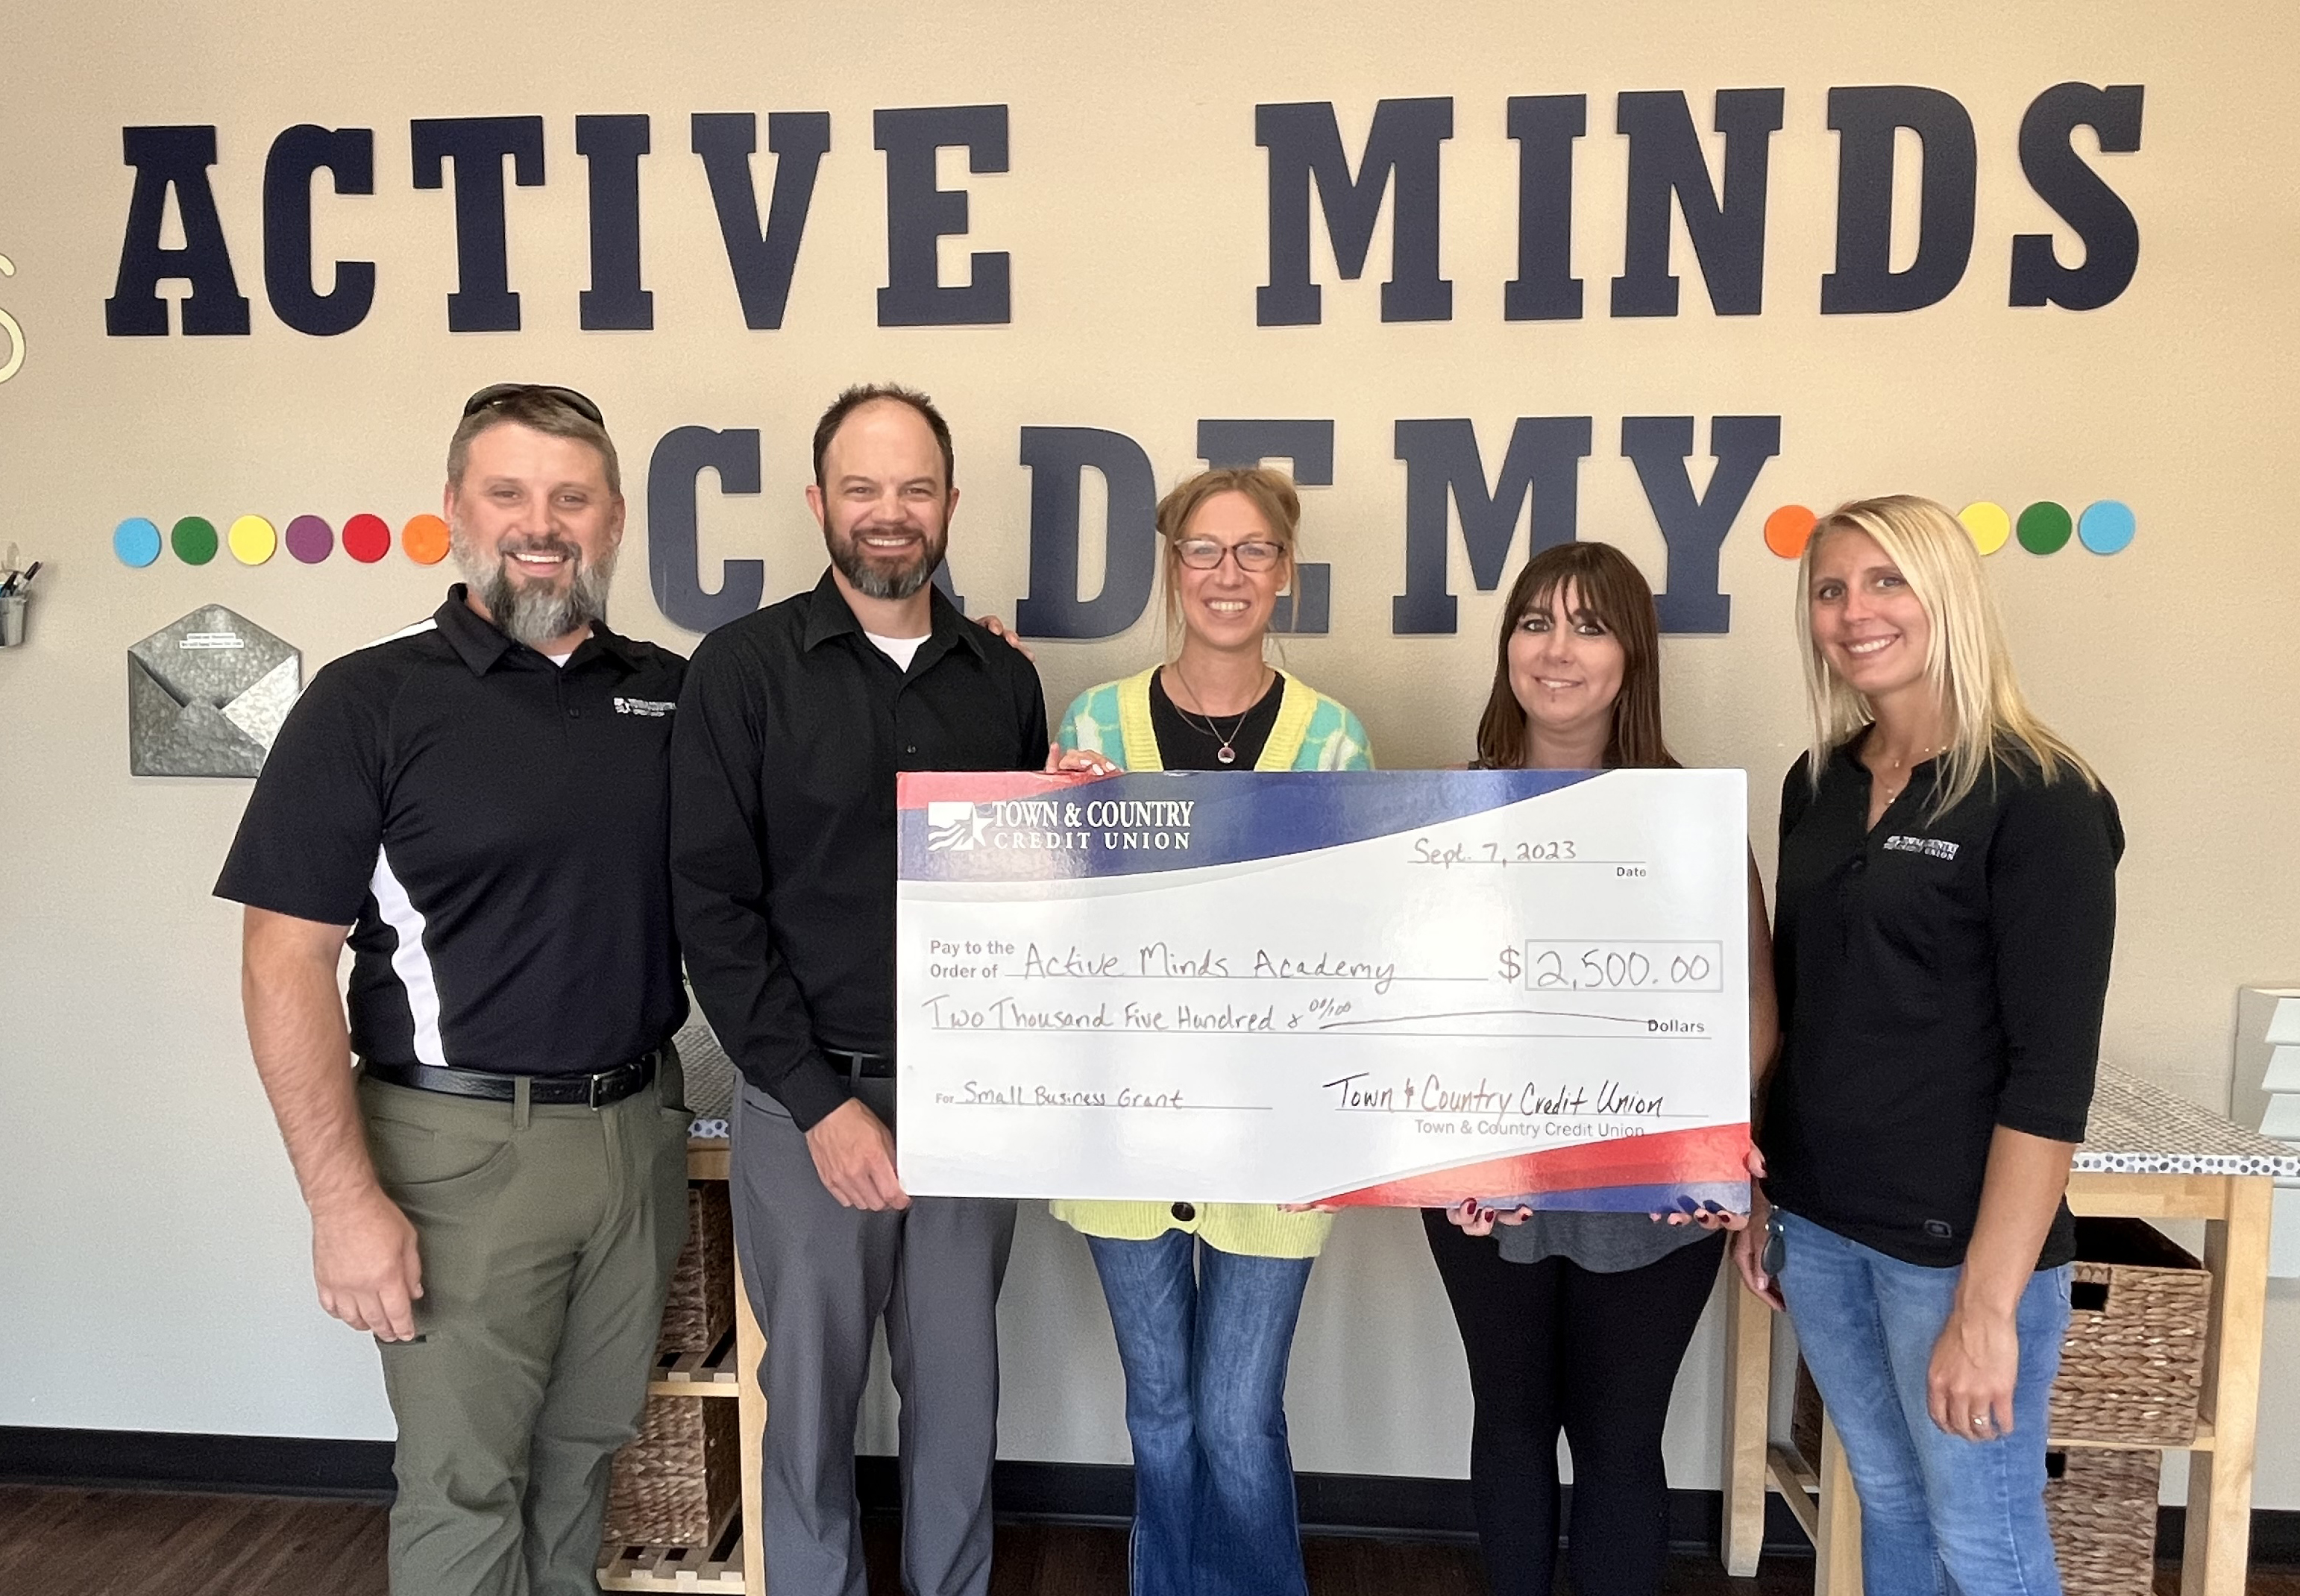 Town & Country Credit Union presenting a ceremonial check to Active Minds staff